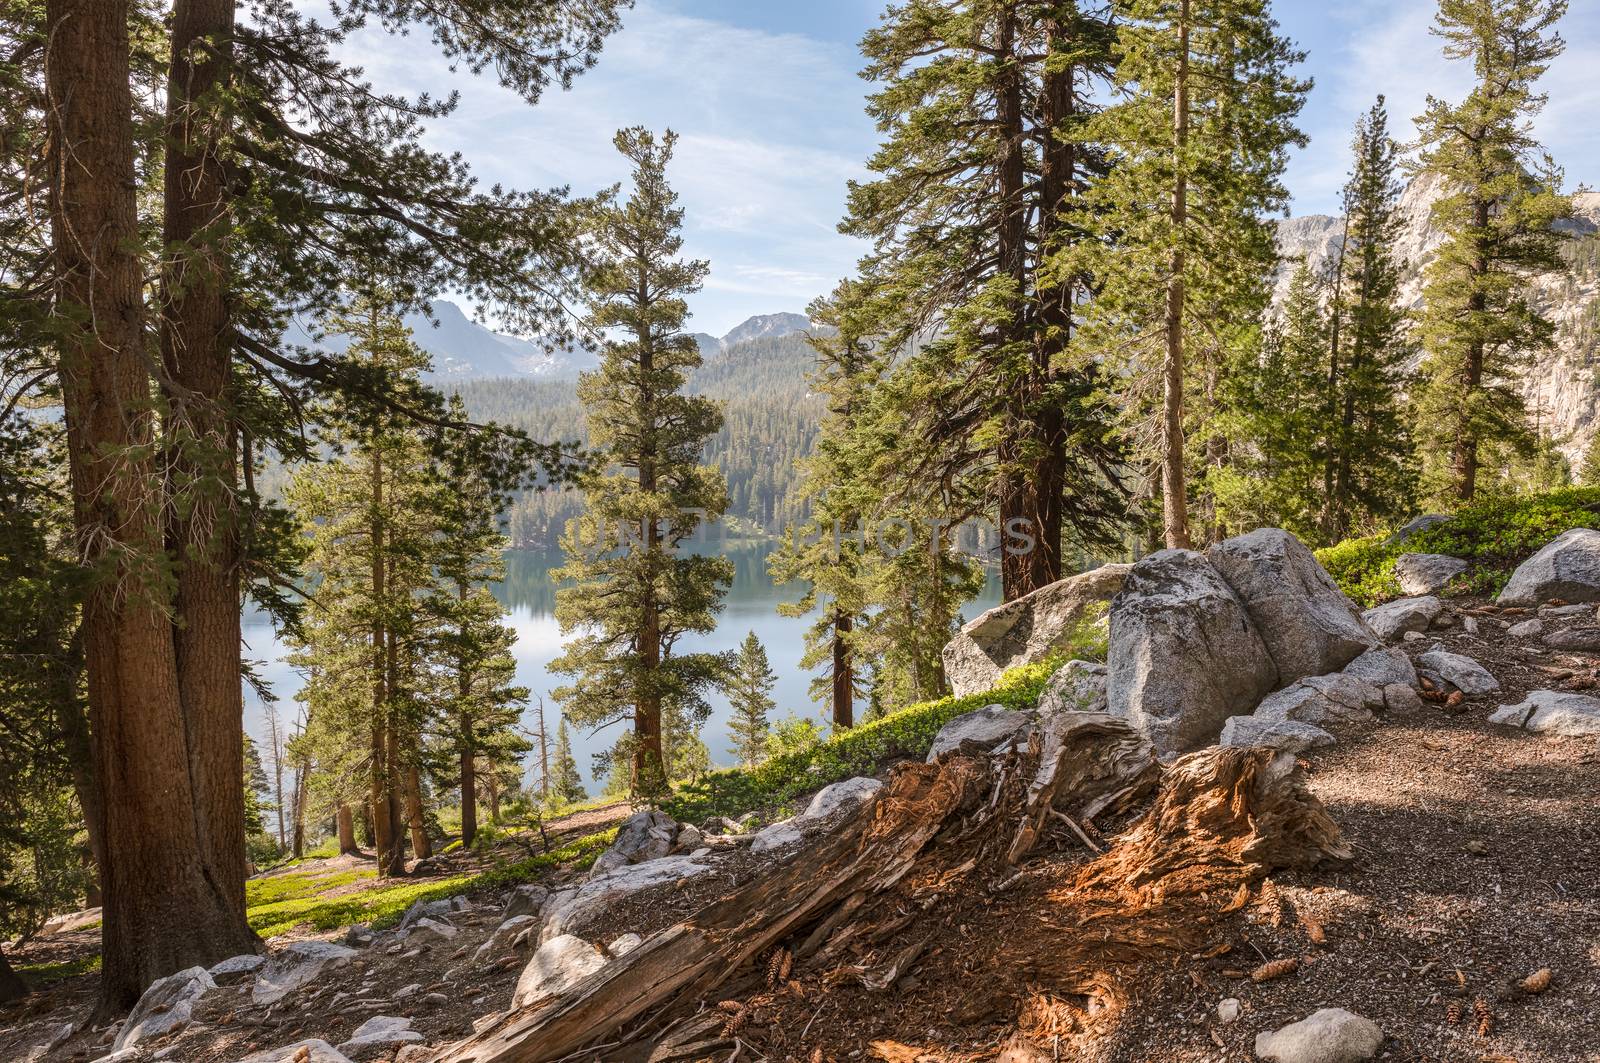 Mountainside with pine trees and lake in the distance in Mammoth Lakes, California